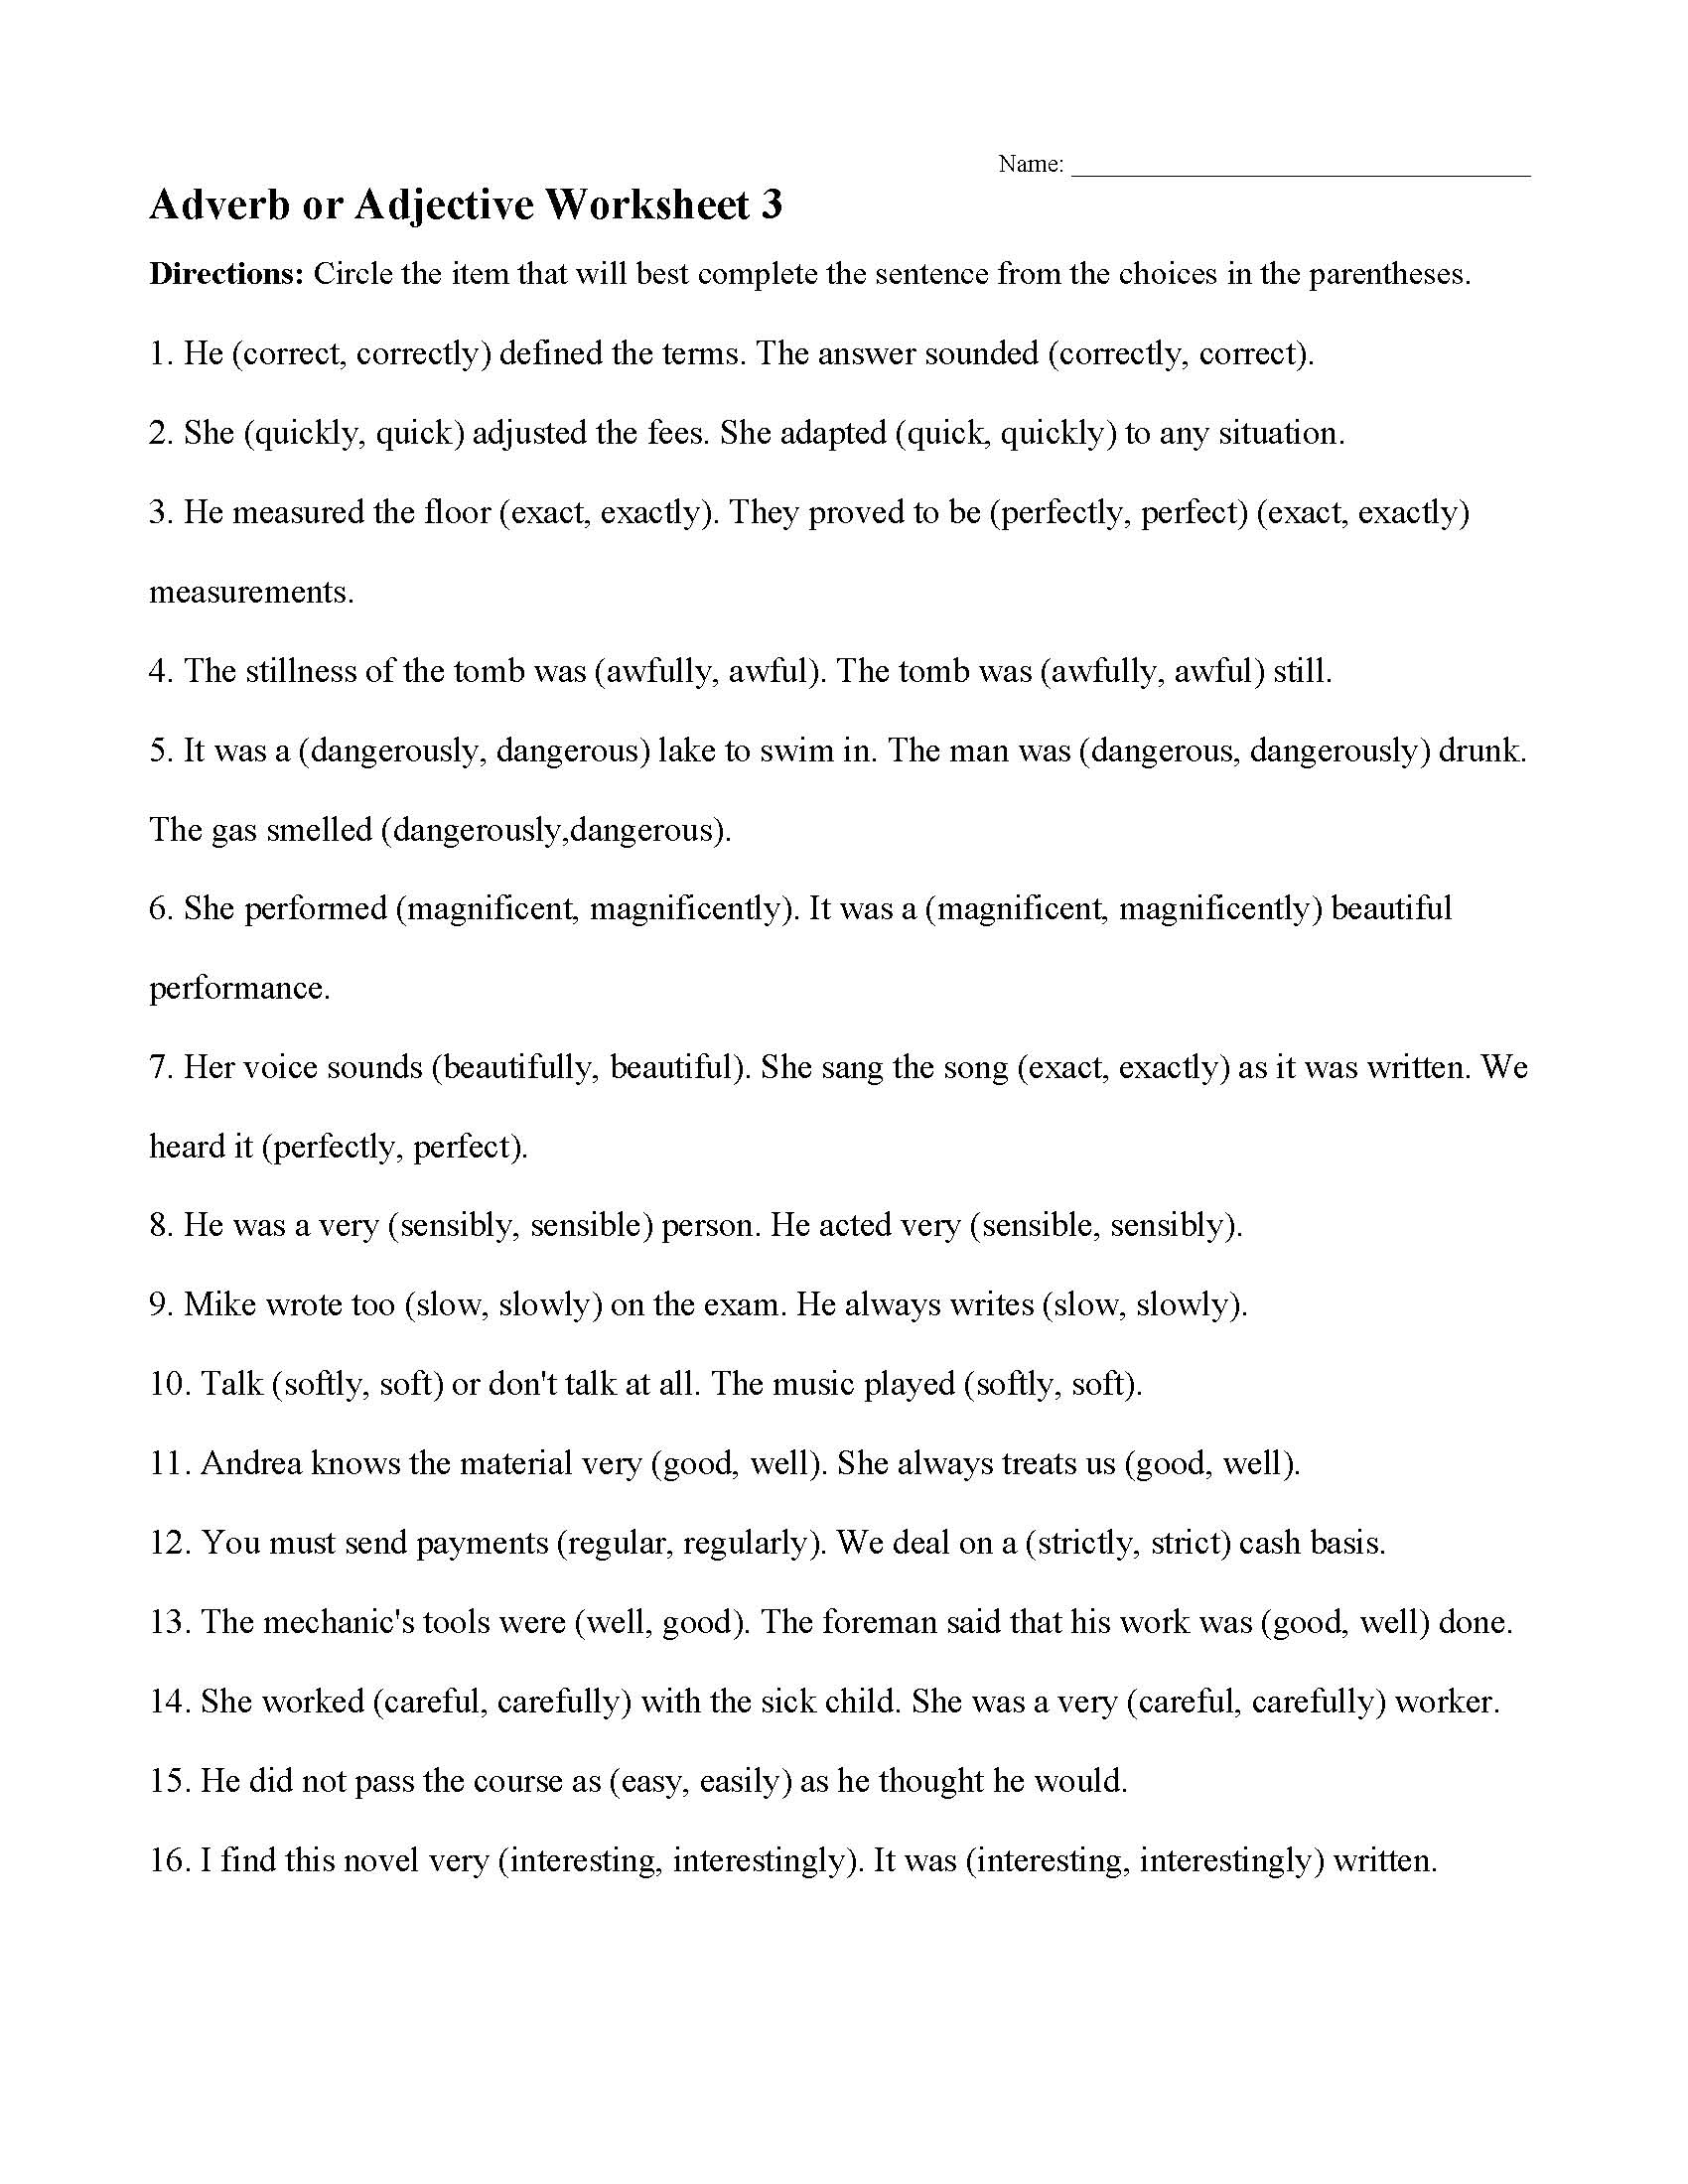 adverbs-and-adjectives-worksheet-3-preview